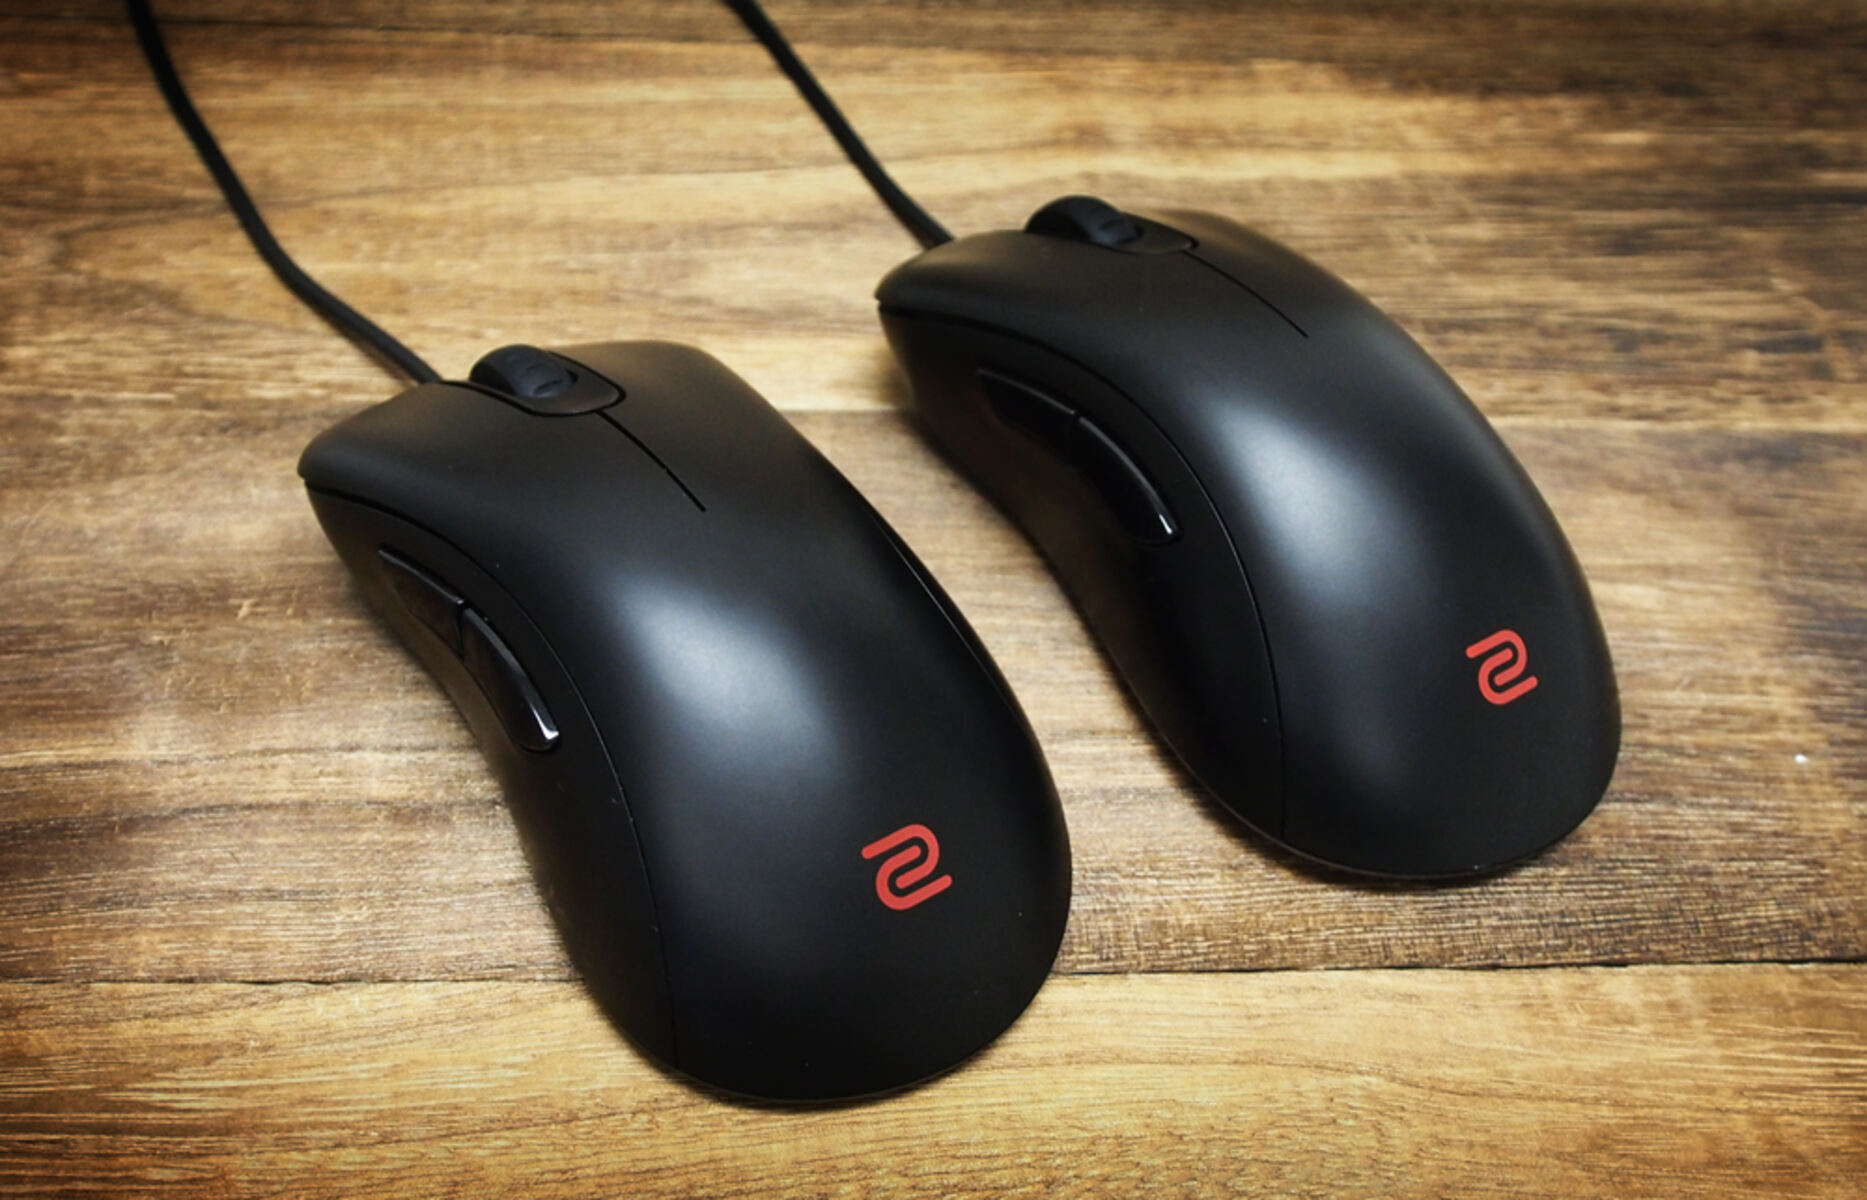 Zowie Gear Ergonomic Optical Gaming Mouse (EC2-A) – How To Adjust DPI